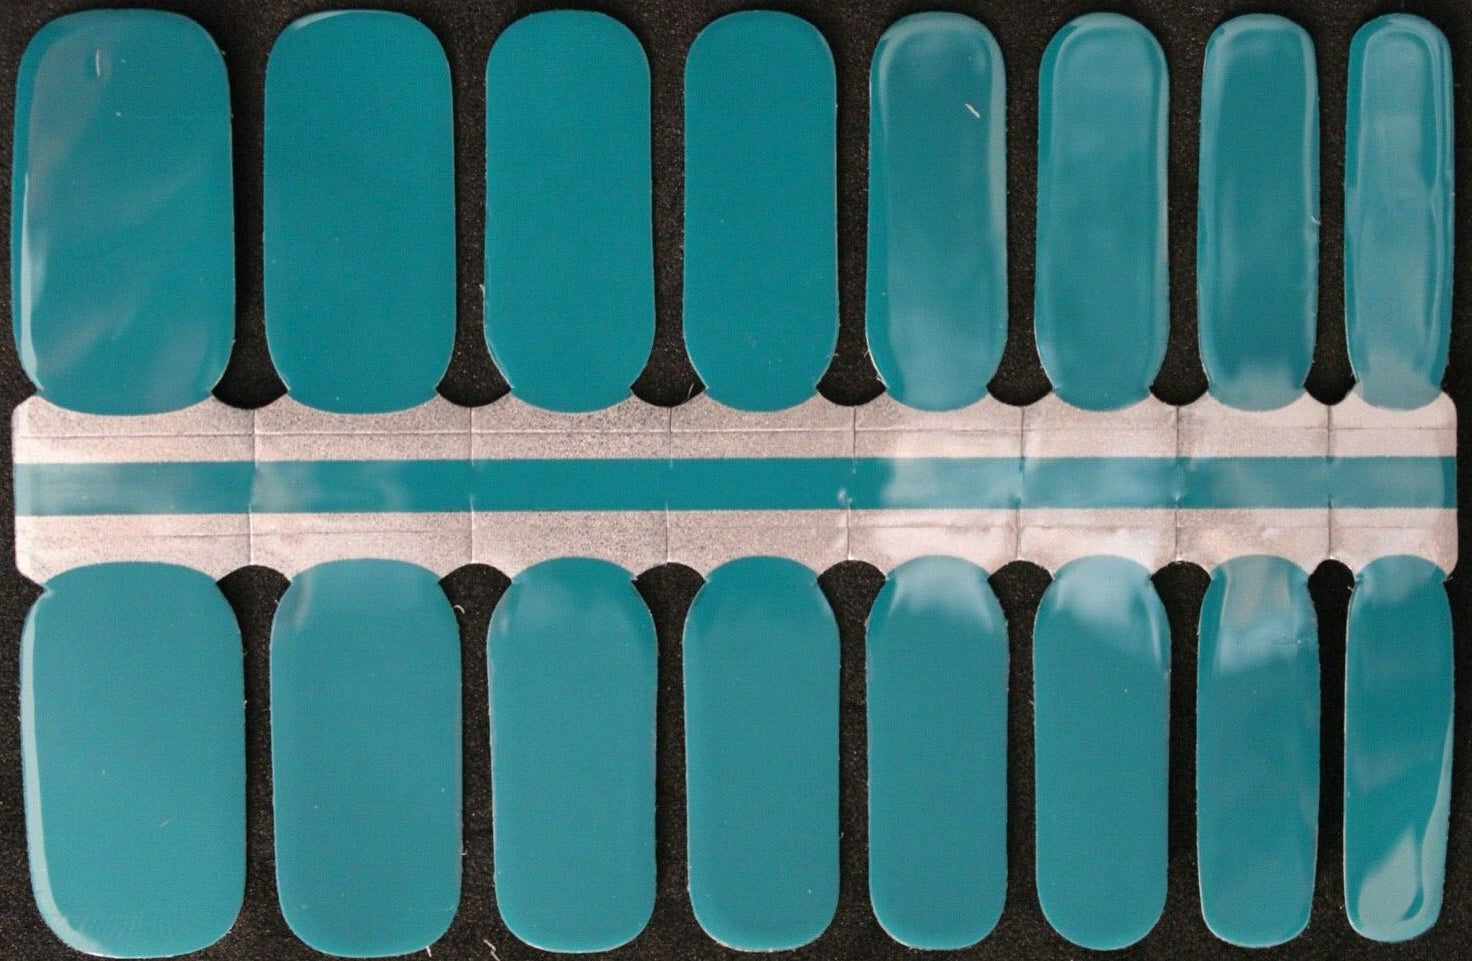 Blue green solid color manicure nail polish wraps stickers